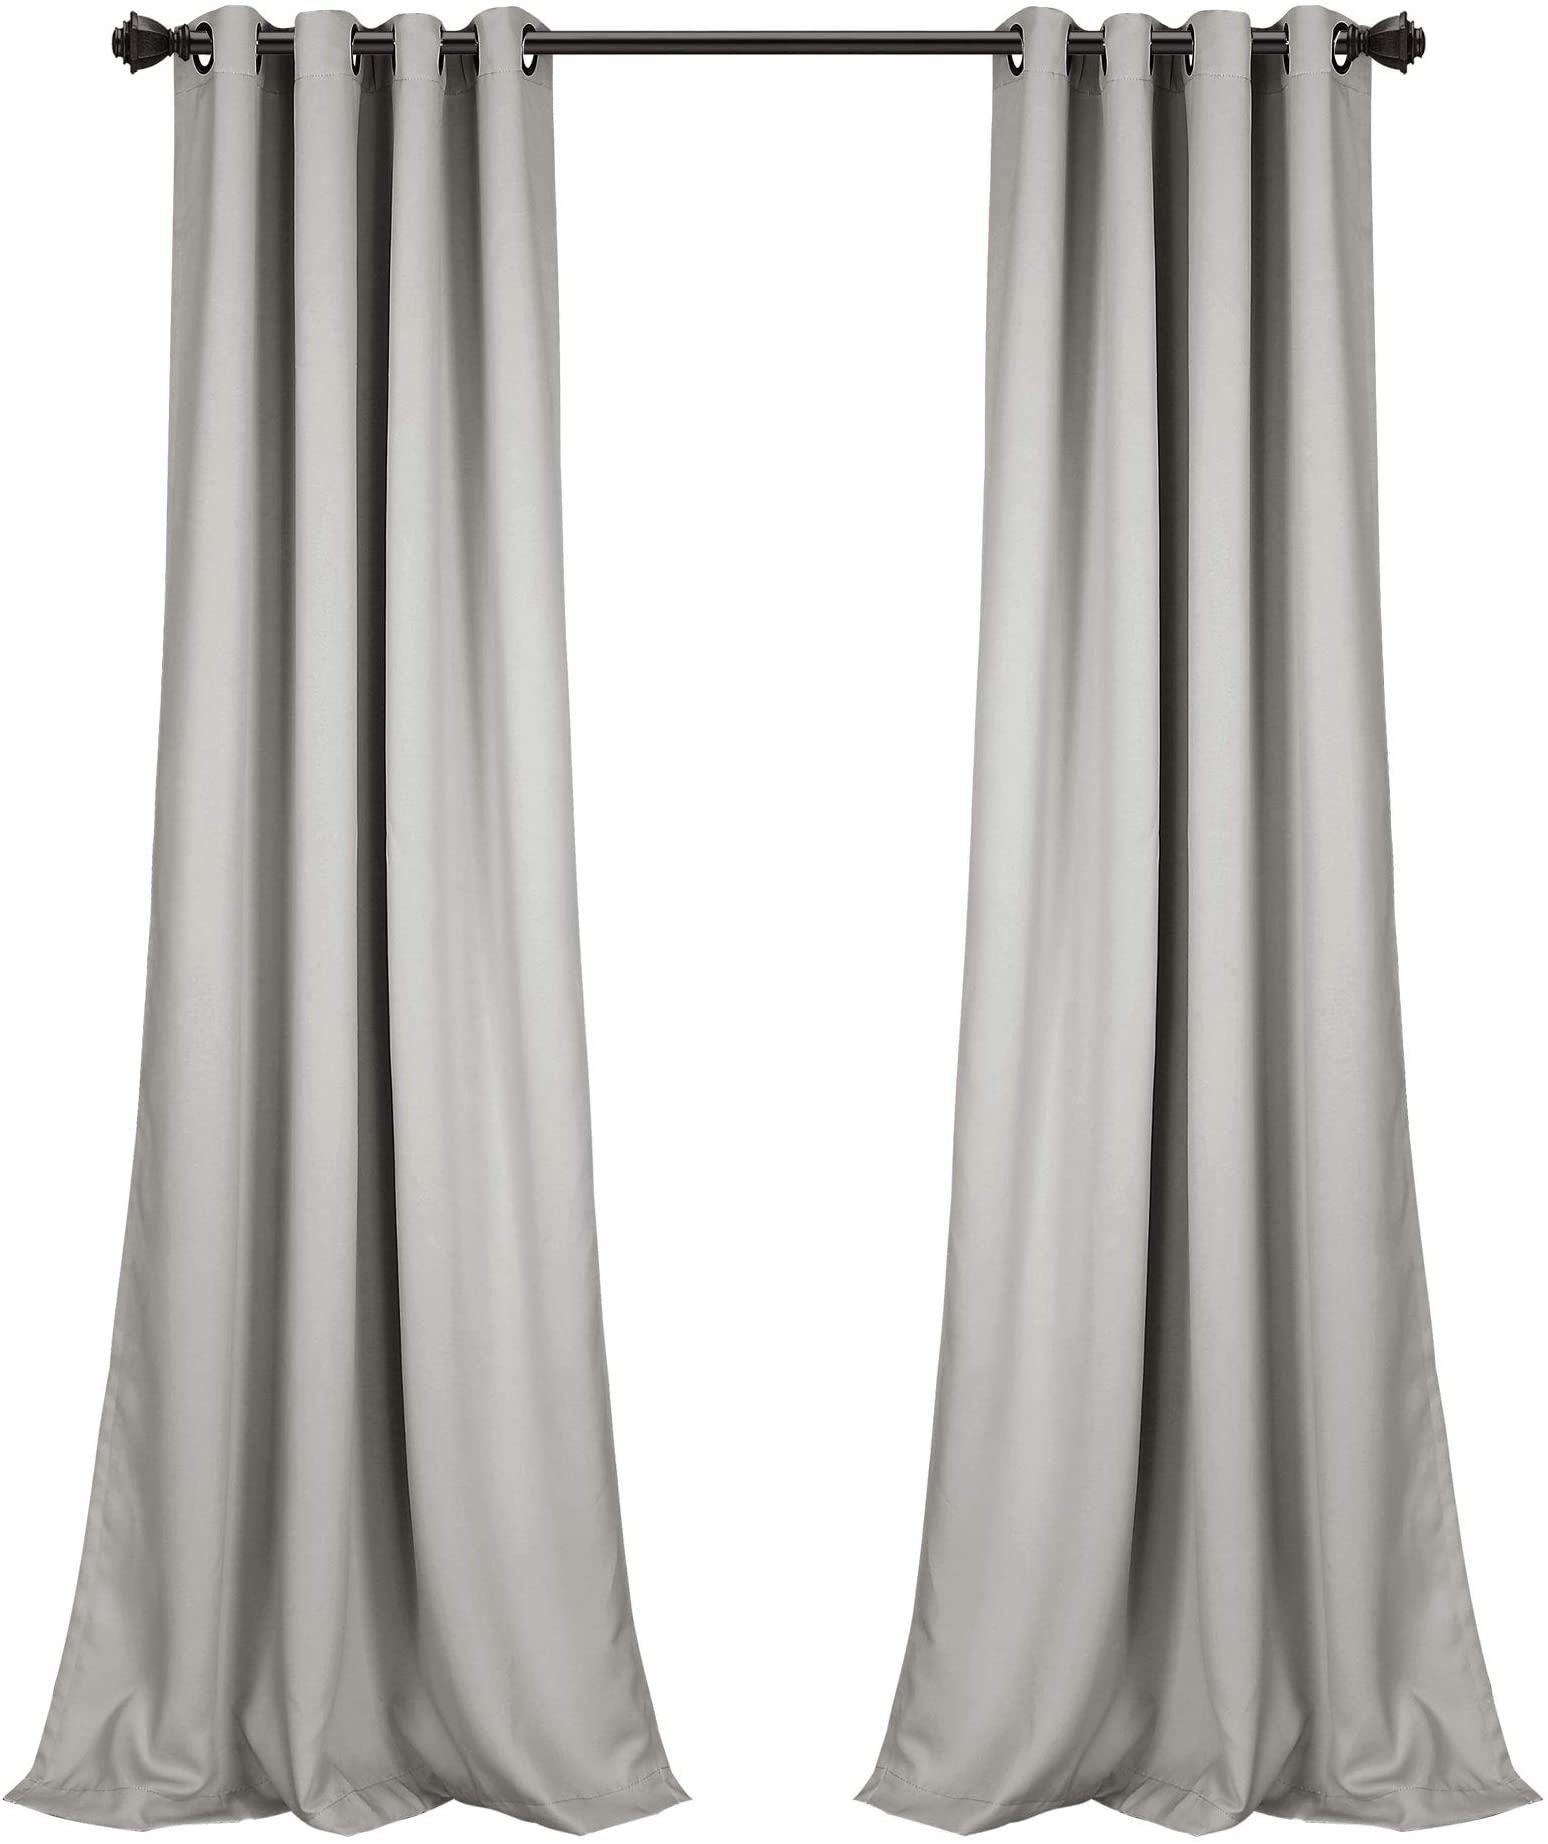 Lush Decor Curtains Grommet With Insulated Blackout Lining Window Panel